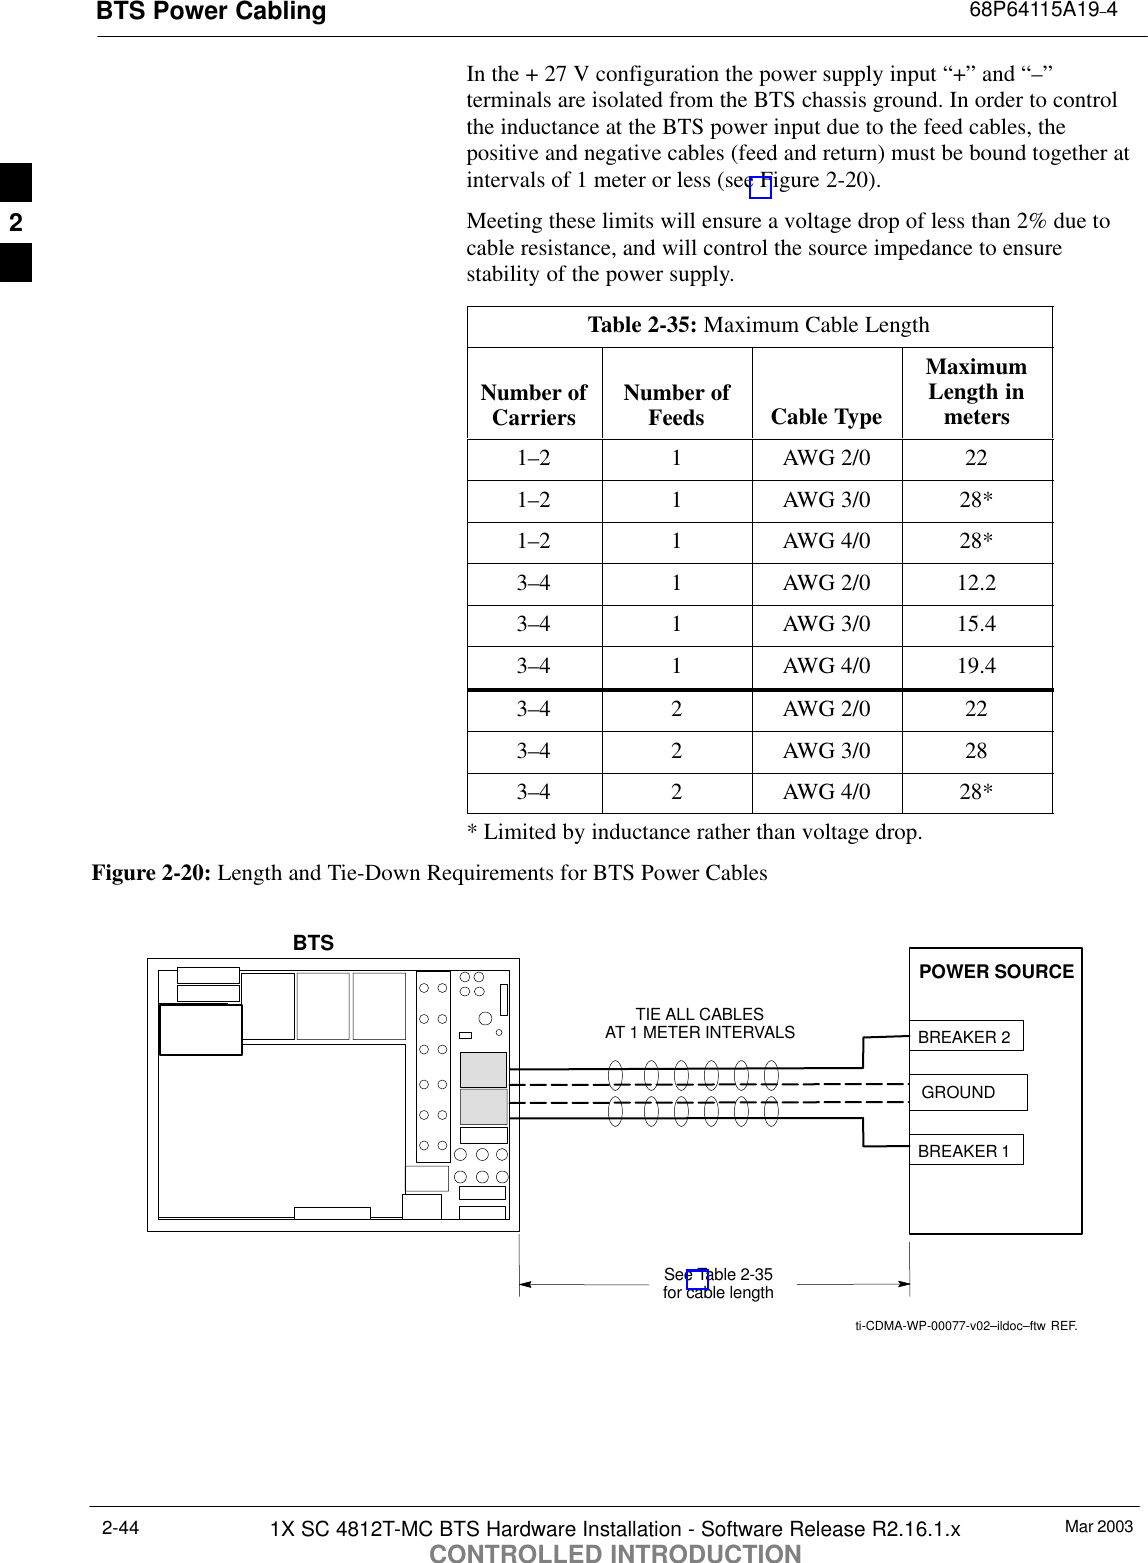 BTS Power Cabling 68P64115A19–4Mar 20031X SC 4812T-MC BTS Hardware Installation - Software Release R2.16.1.xCONTROLLED INTRODUCTION2-44In the + 27 V configuration the power supply input “+” and “–”terminals are isolated from the BTS chassis ground. In order to controlthe inductance at the BTS power input due to the feed cables, thepositive and negative cables (feed and return) must be bound together atintervals of 1 meter or less (see Figure 2-20).Meeting these limits will ensure a voltage drop of less than 2% due tocable resistance, and will control the source impedance to ensurestability of the power supply.Table 2-35: Maximum Cable LengthNumber ofCarriers Number ofFeeds Cable TypeMaximumLength inmeters1–2 1 AWG 2/0 221–2 1 AWG 3/0 28*1–2 1 AWG 4/0 28*3–4 1 AWG 2/0 12.23–4 1 AWG 3/0 15.43–4 1 AWG 4/0 19.43–4 2 AWG 2/0 223–4 2 AWG 3/0 283–4 2 AWG 4/0 28** Limited by inductance rather than voltage drop.Figure 2-20: Length and Tie-Down Requirements for BTS Power Cablesti-CDMA-WP-00077-v02–ildoc–ftw REF.12POWER SOURCEBREAKER 1TIE ALL CABLESAT 1 METER INTERVALSSee Table 2-35for cable lengthBREAKER 2GROUNDBTS2